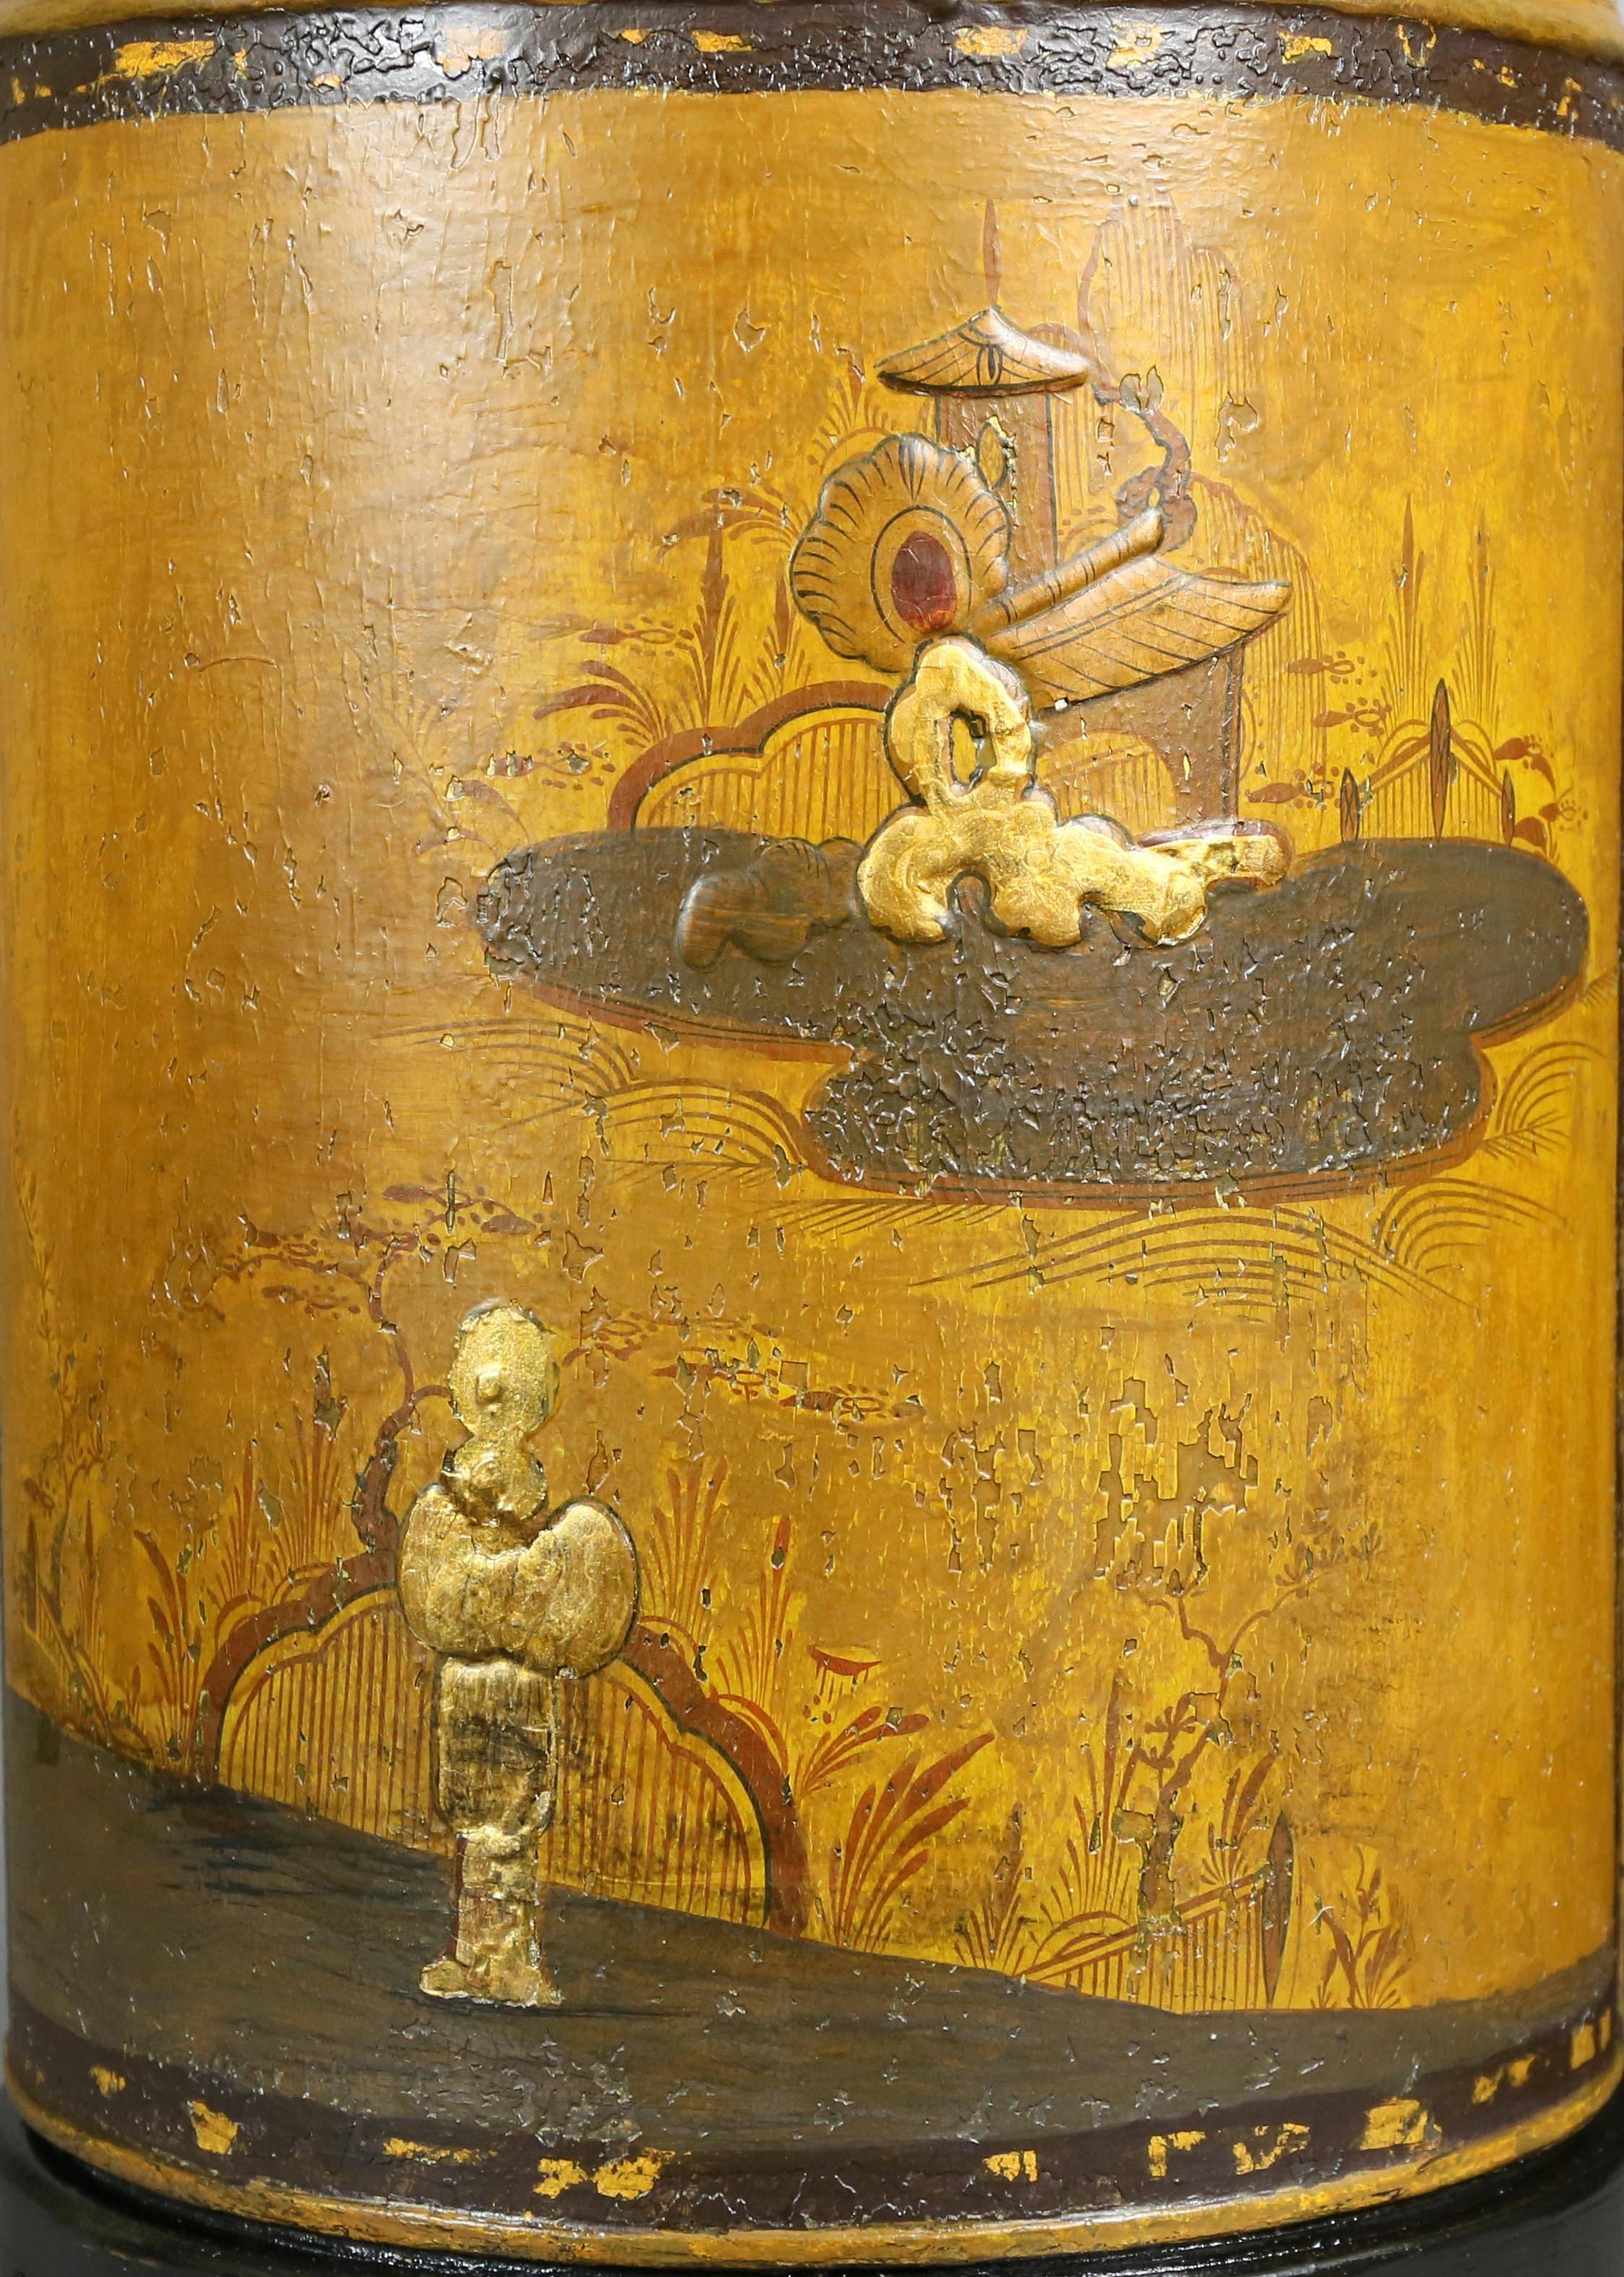 Mustard yellow tea canisters with chinoiserie decoration on each, depicting a figure and a small dwelling.